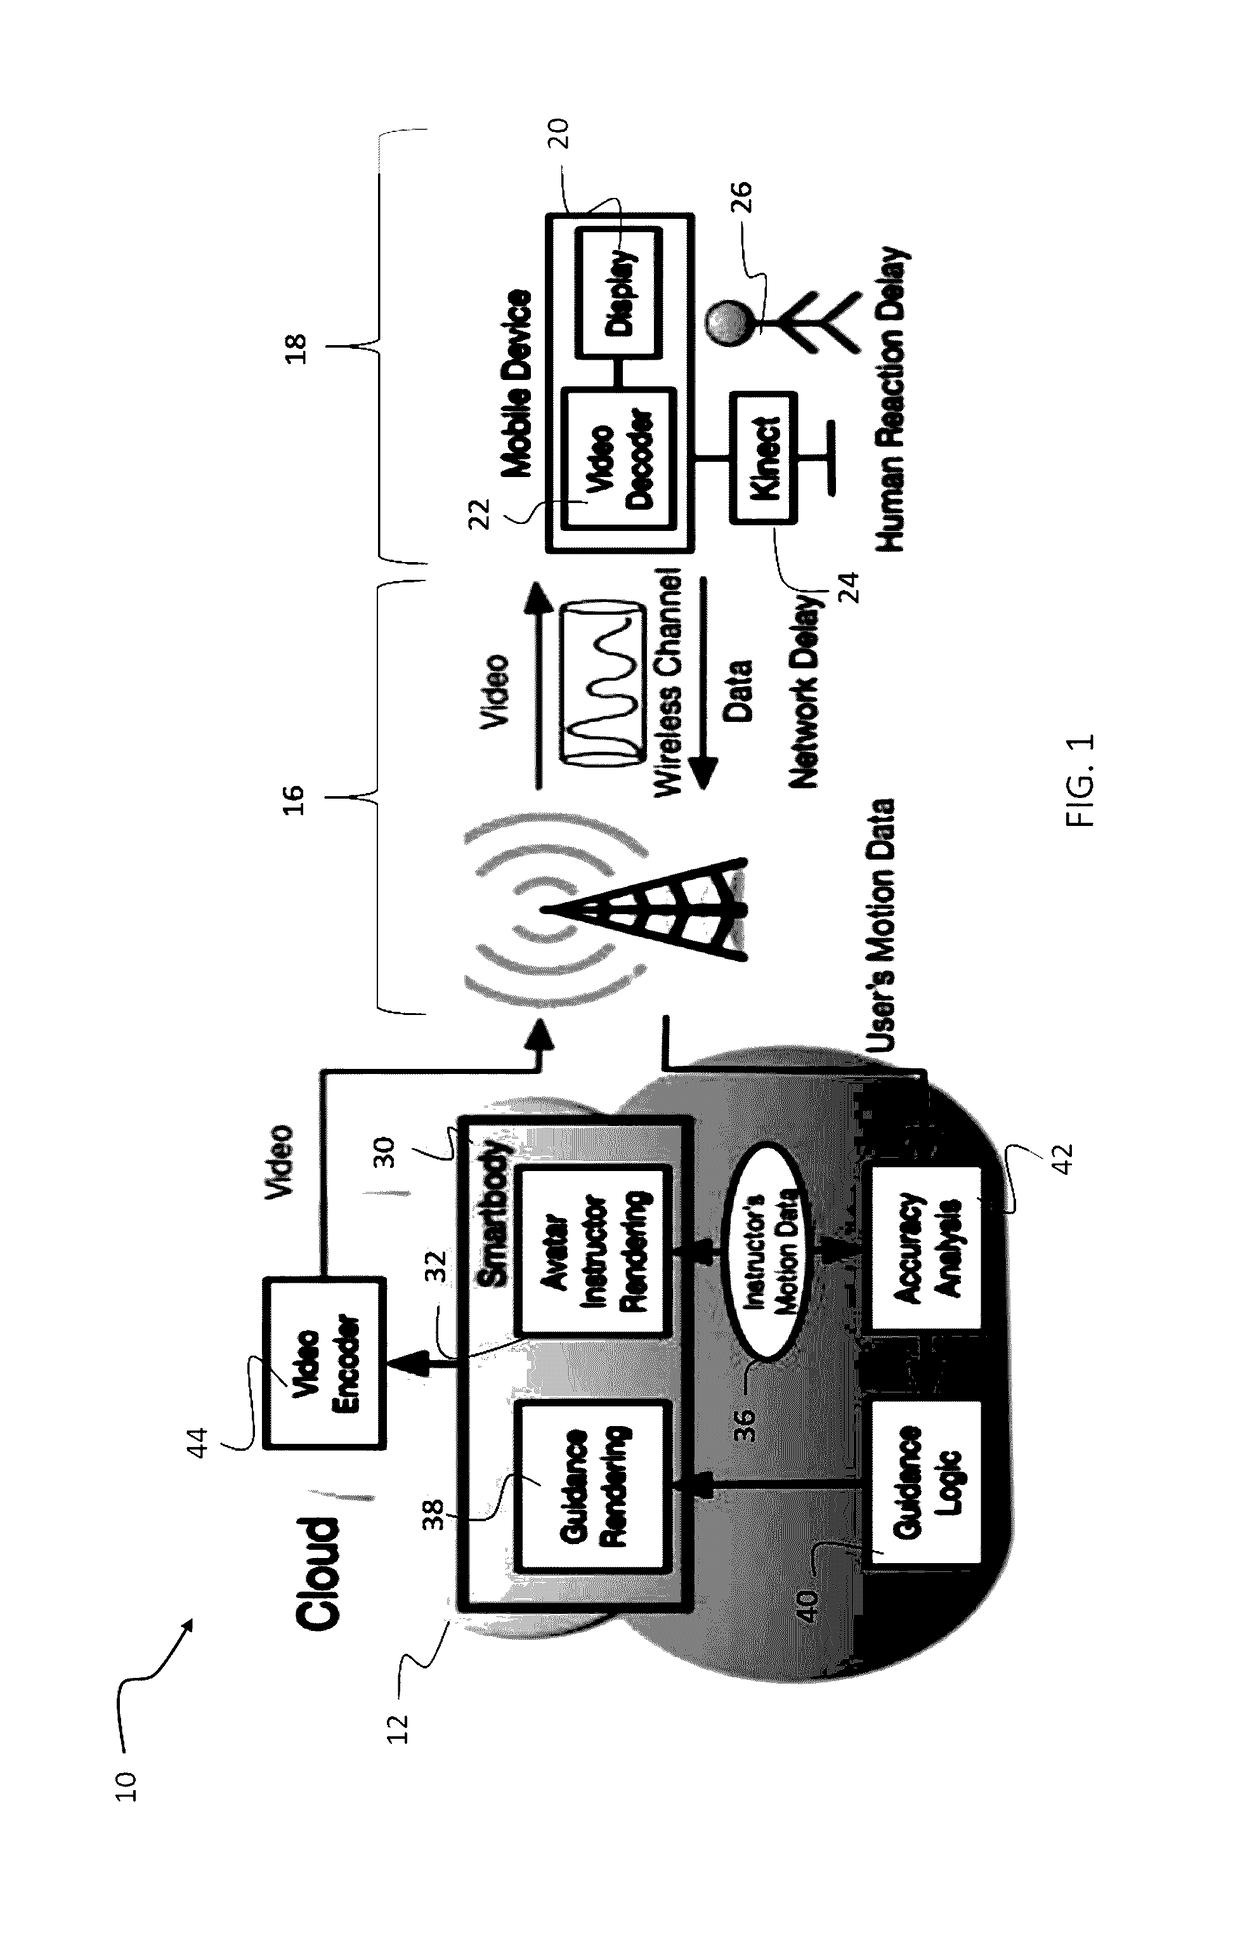 System and method for gesture capture and real-time cloud based avatar training